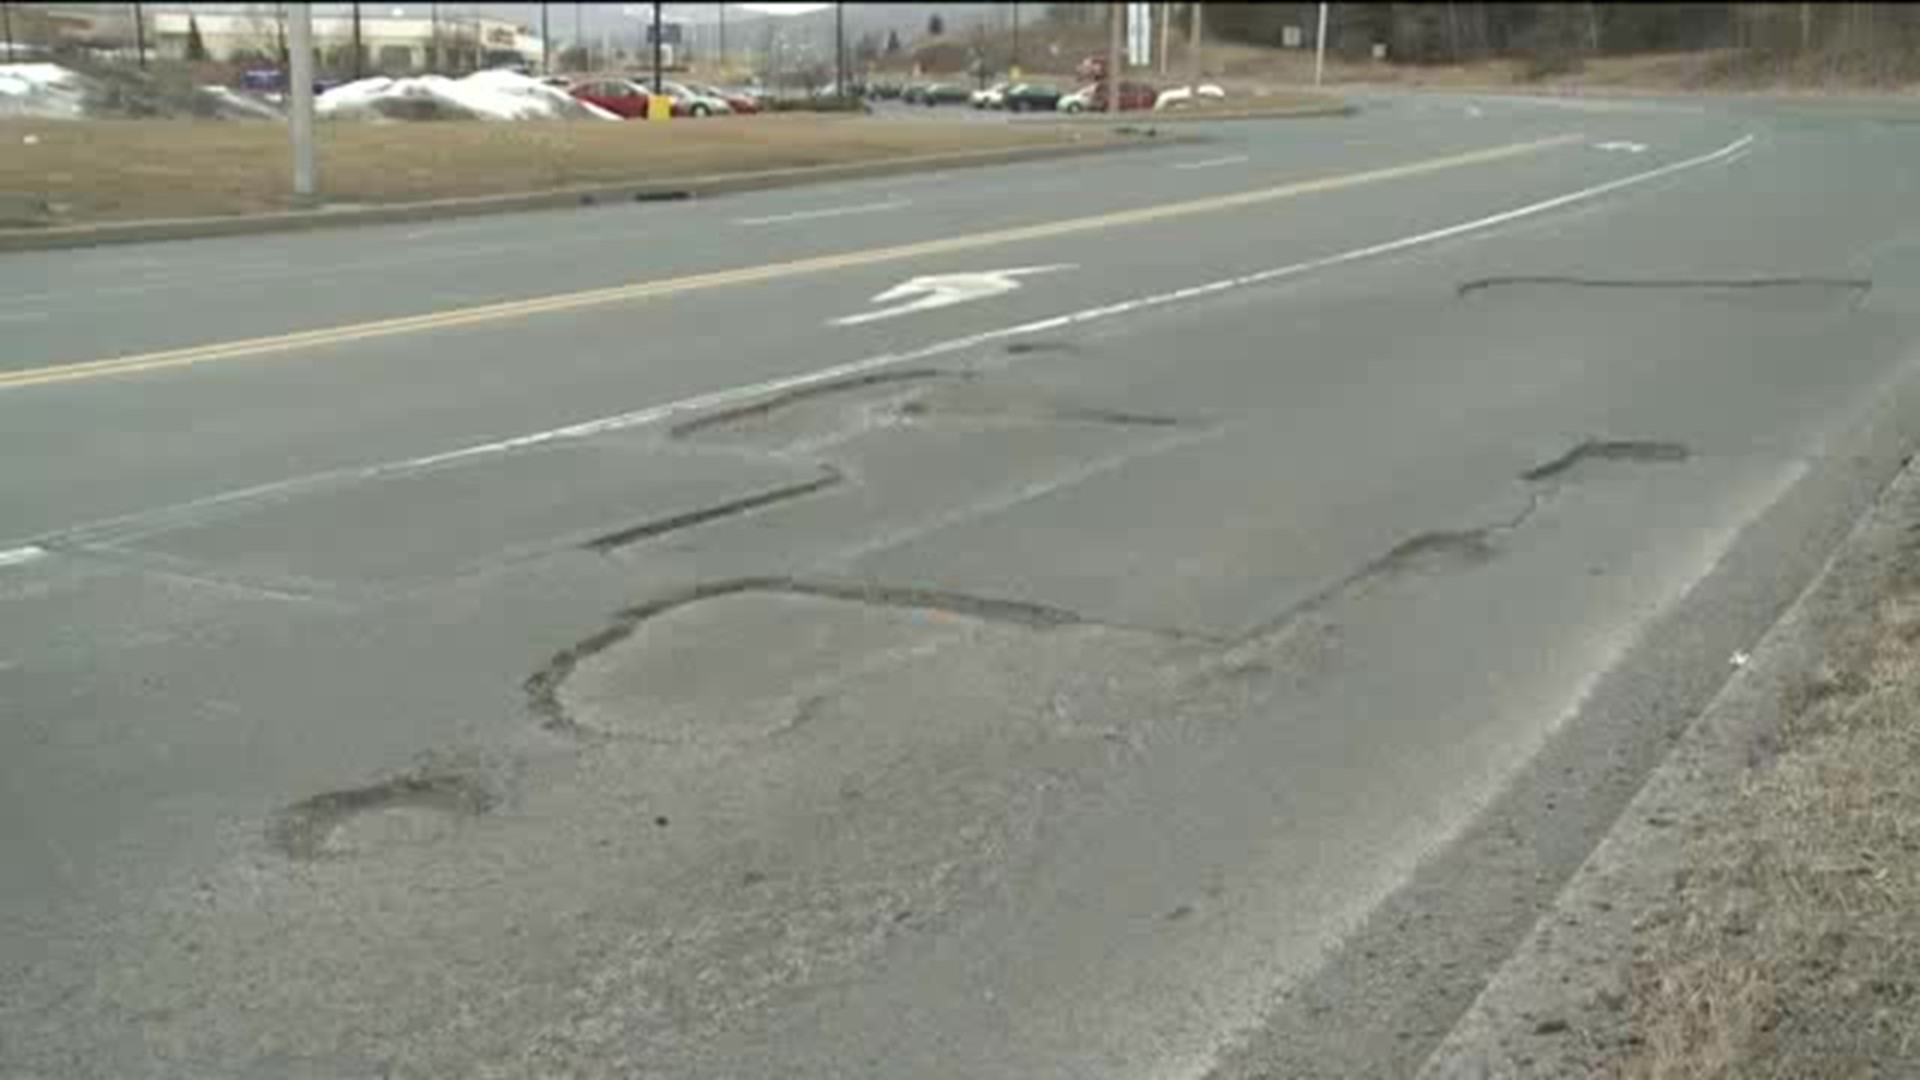 Mall’s Road May Take Weeks to Fix